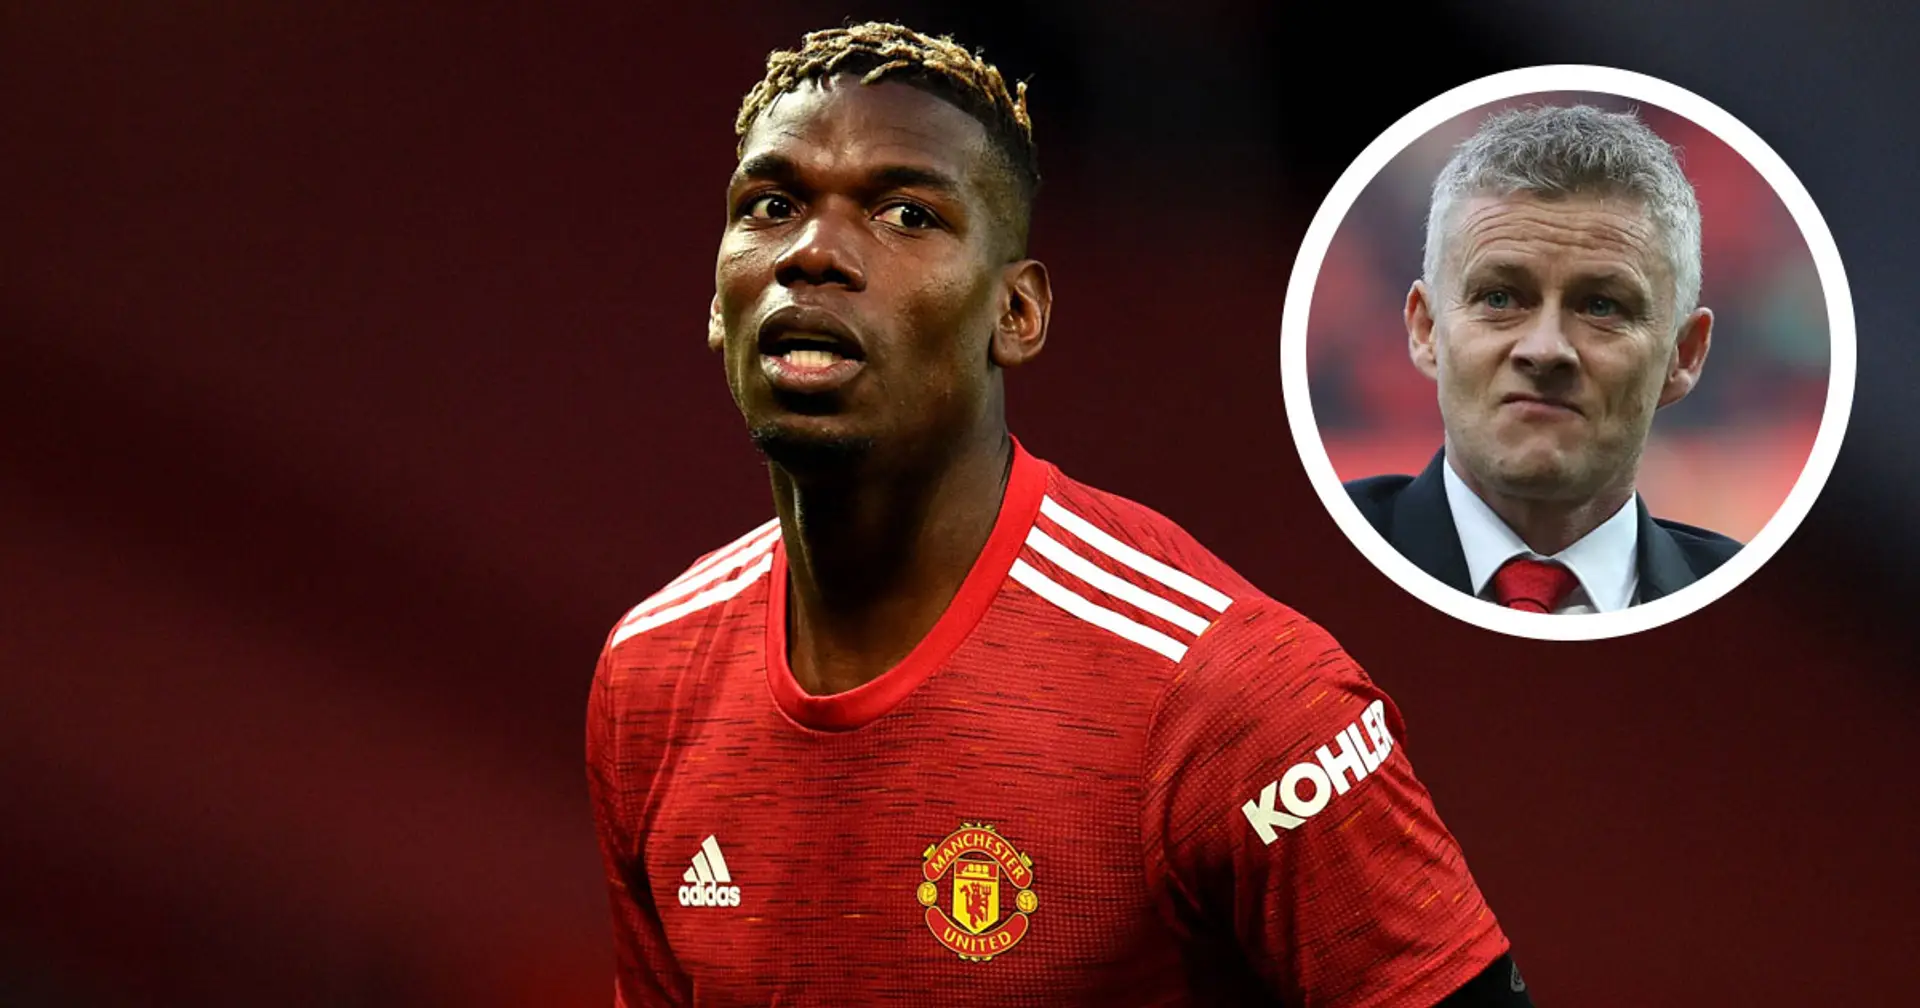 'Talks are ongoing': Solskjaer gives key update on Pogba amid exit rumours